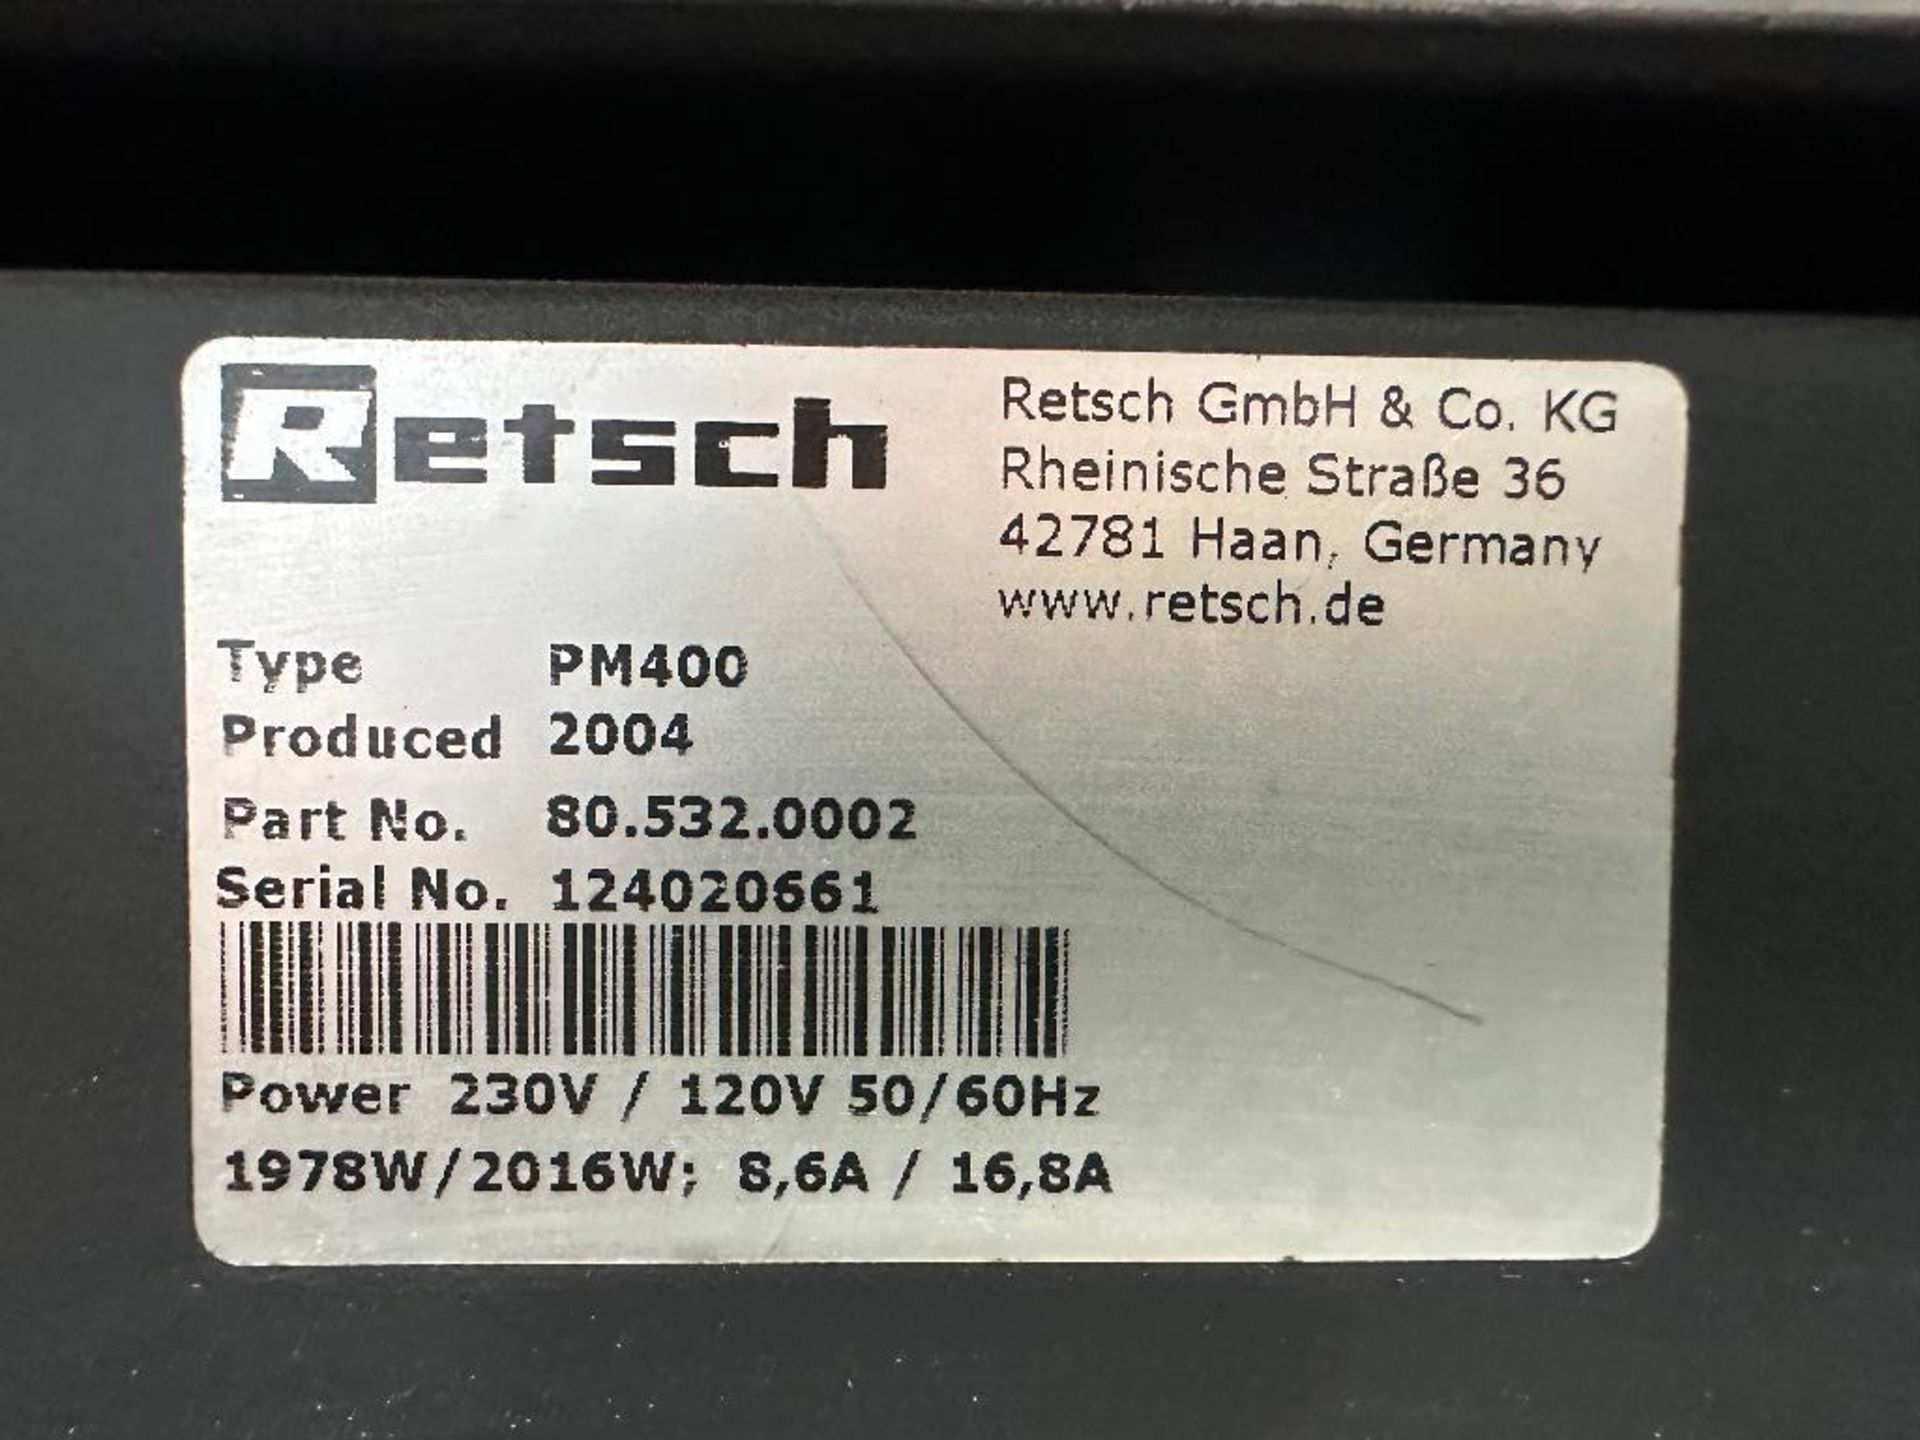 Retsch PM400 Ball Mill w/ 4 Grinding Stations, 230V, s/n 12402066, 2004 - Image 8 of 8